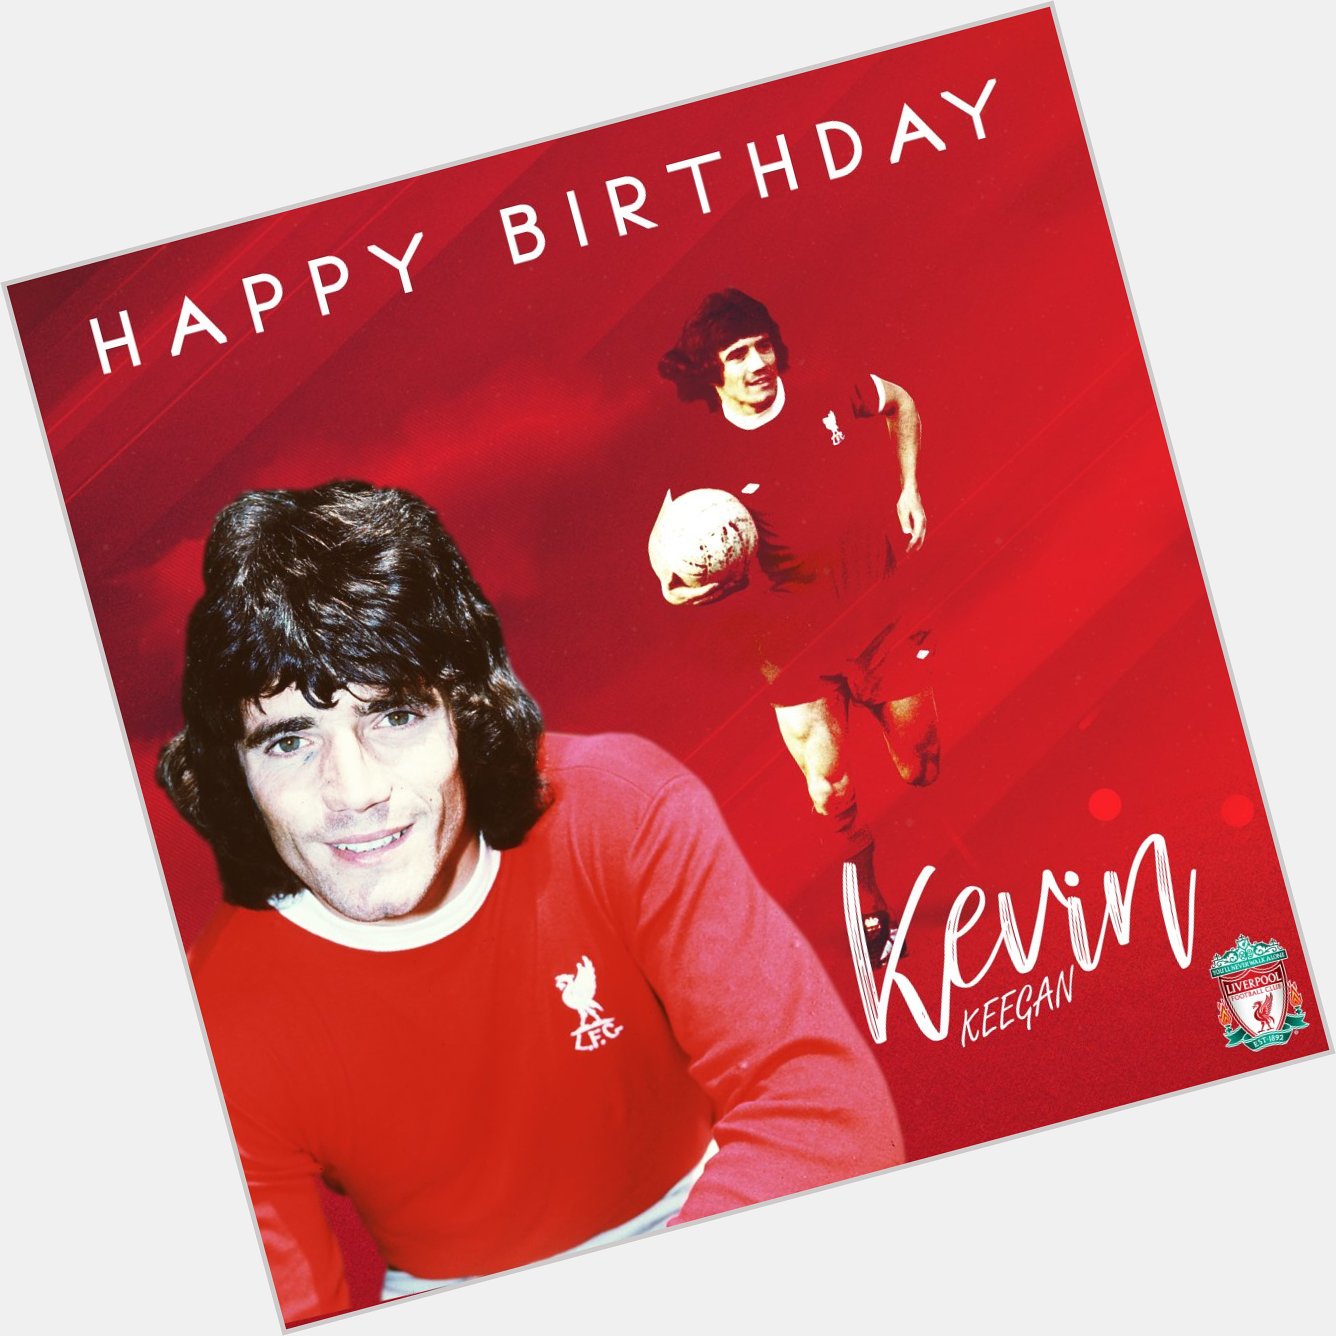 Happy 6  8  th birthday to one of the best to ever wear Red, Kevin Keegan!  